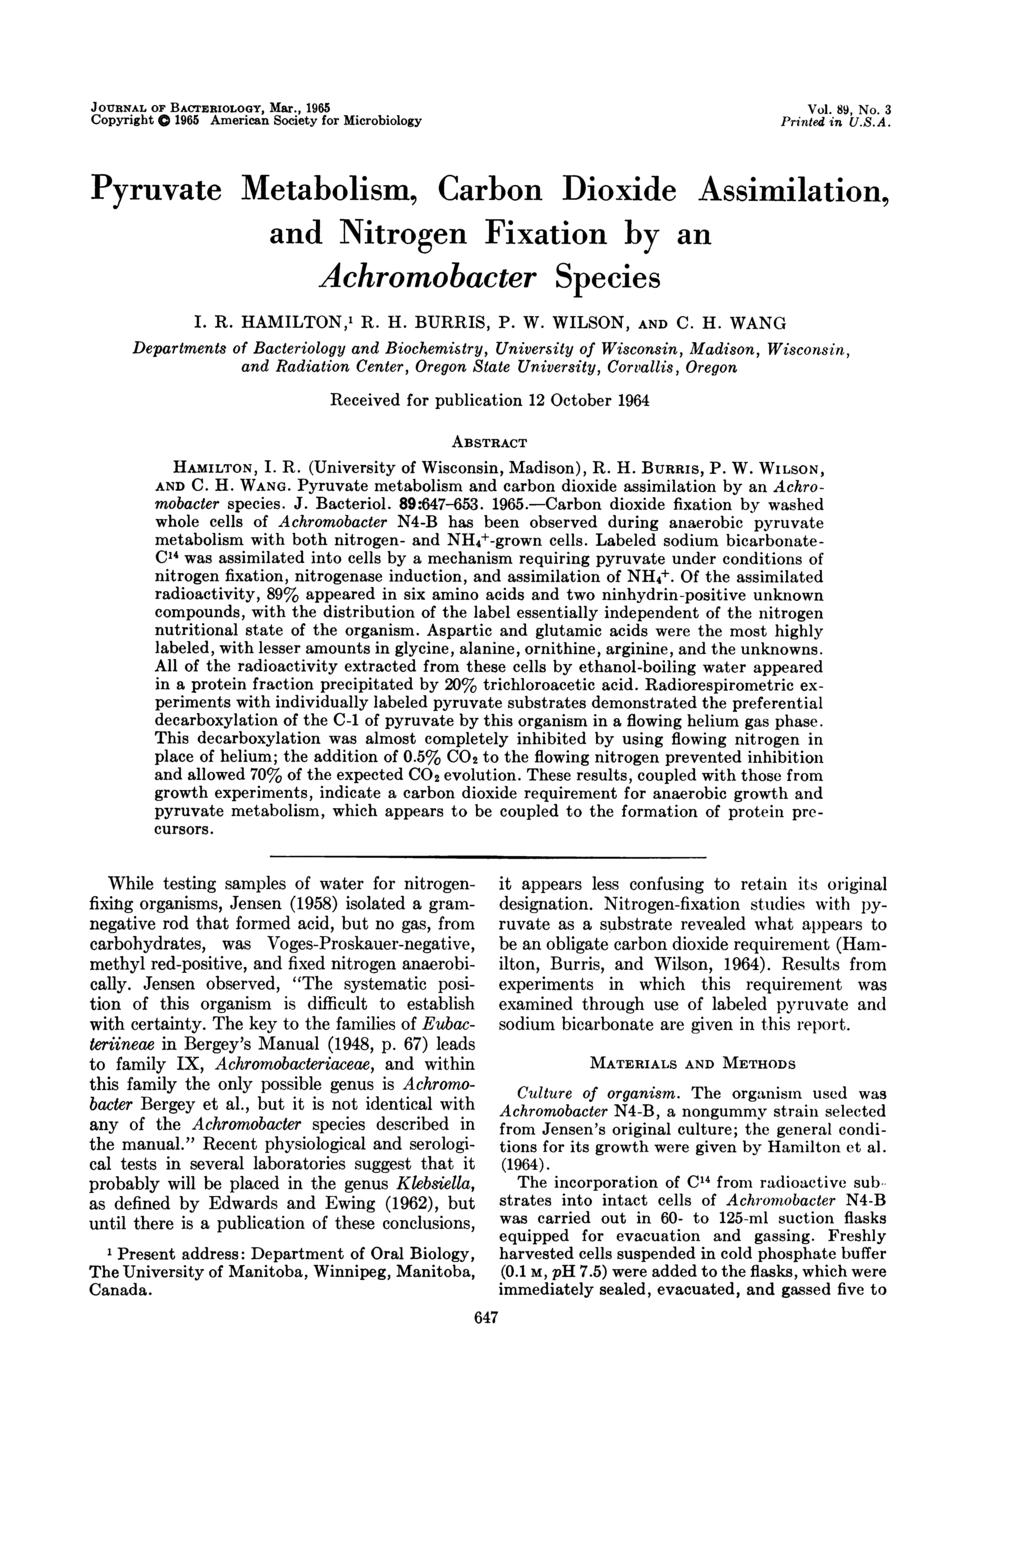 JOURNAL OF BACTERIOLOGY, Mar., 1965 Copyright 0 1965 American Society for Microbiology Vol. 89, No. 3 Printed in U.S.A. Pyruvate Metabolism, Carbon Dioxide Assimilation, and Nitrogen Fixation by an Achromobacter Species I.